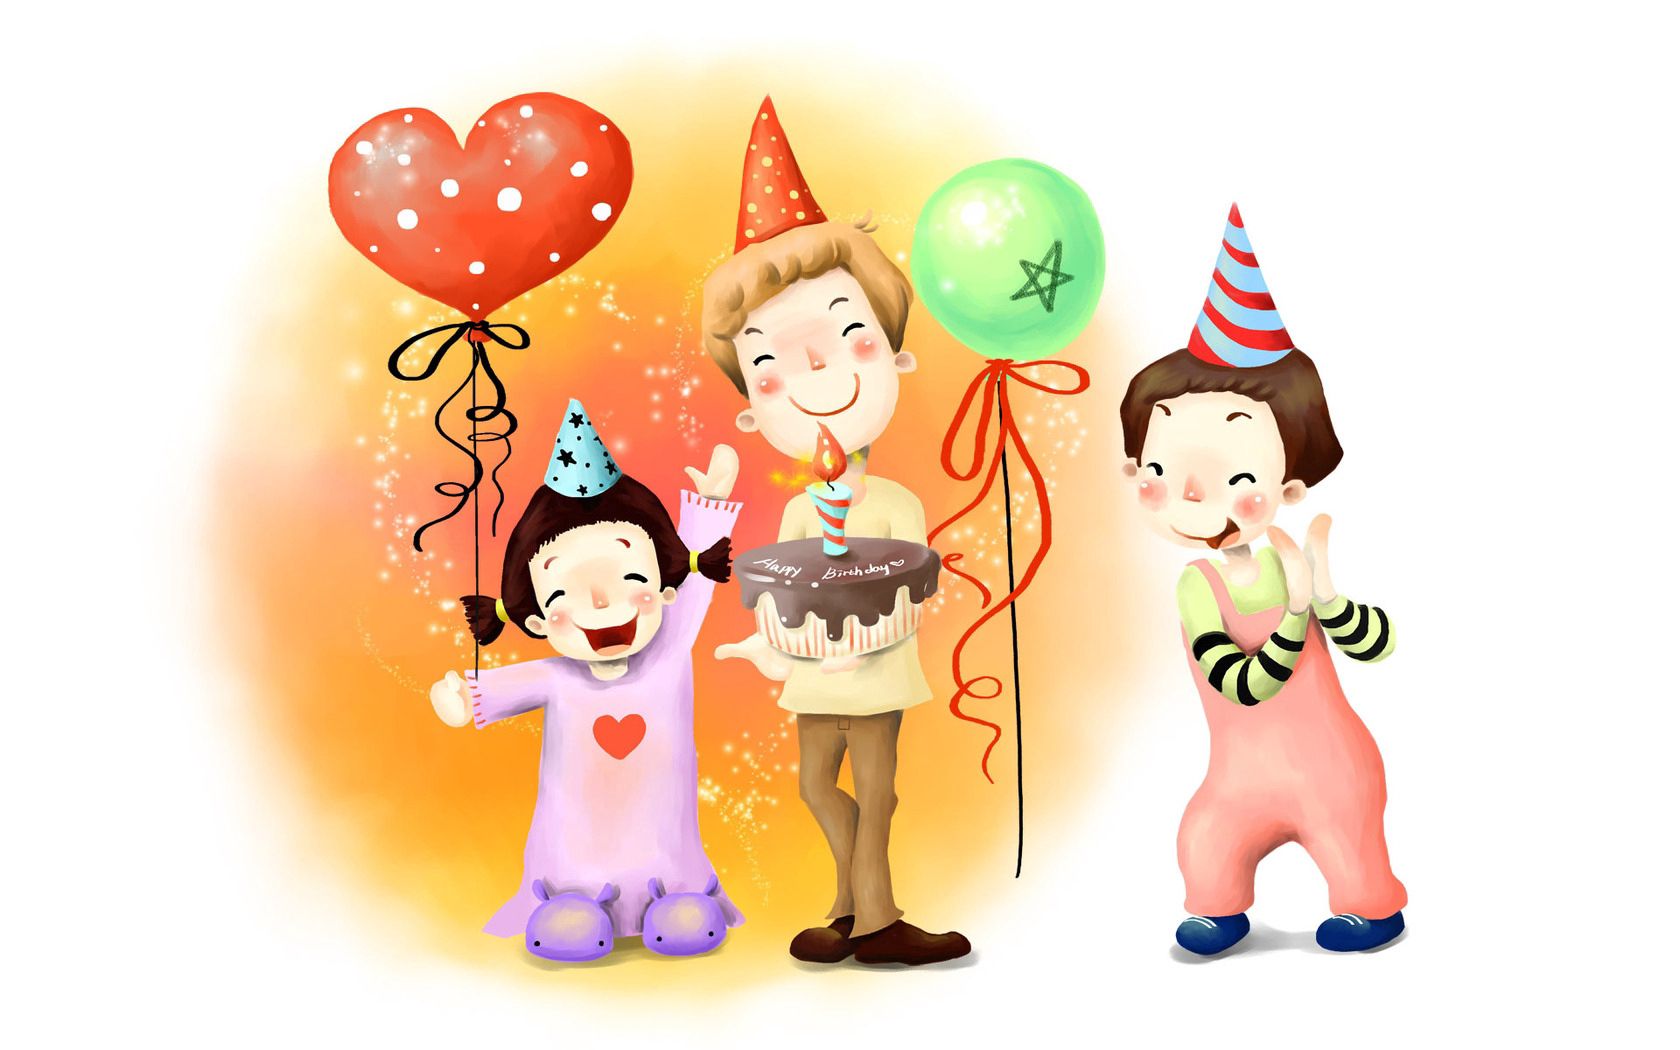 children, balloons, miscellanea, miscellaneous, holiday, picture, drawing, cake, caps, taw, childhood, joy